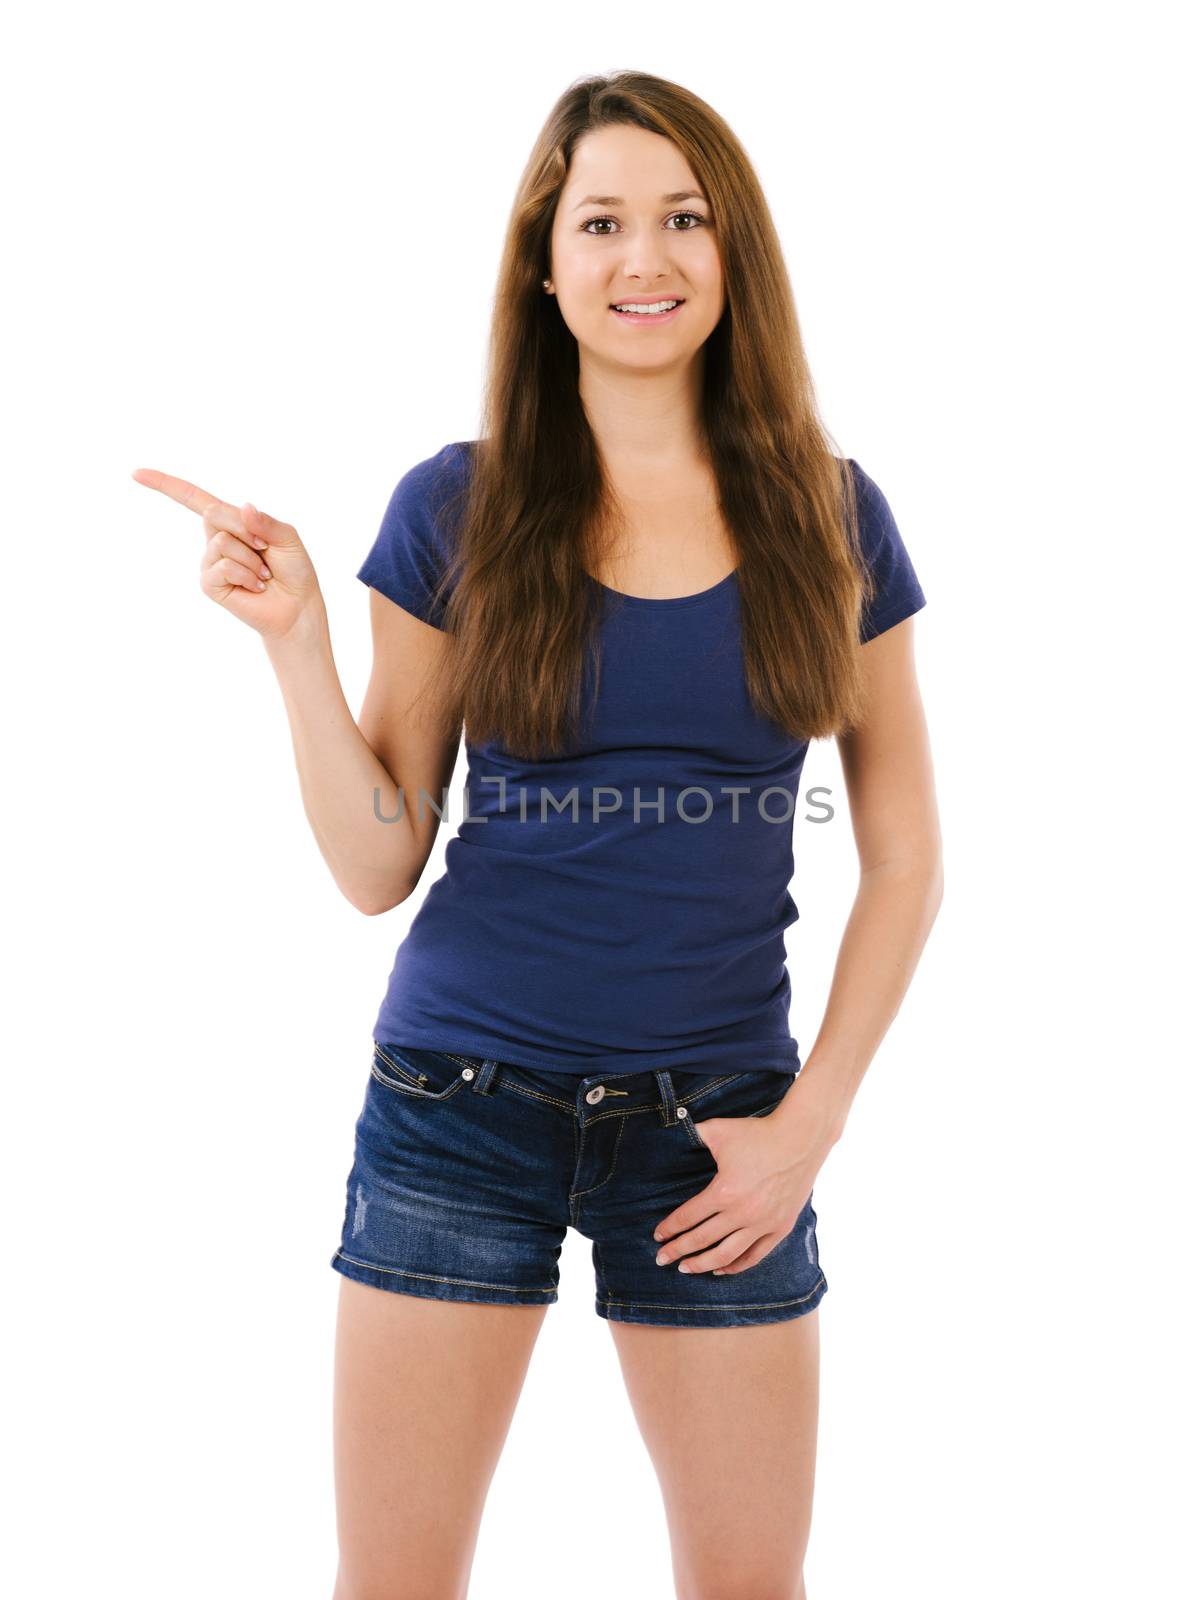 Photo of a happy young female pointing to something with her right hand over white background.